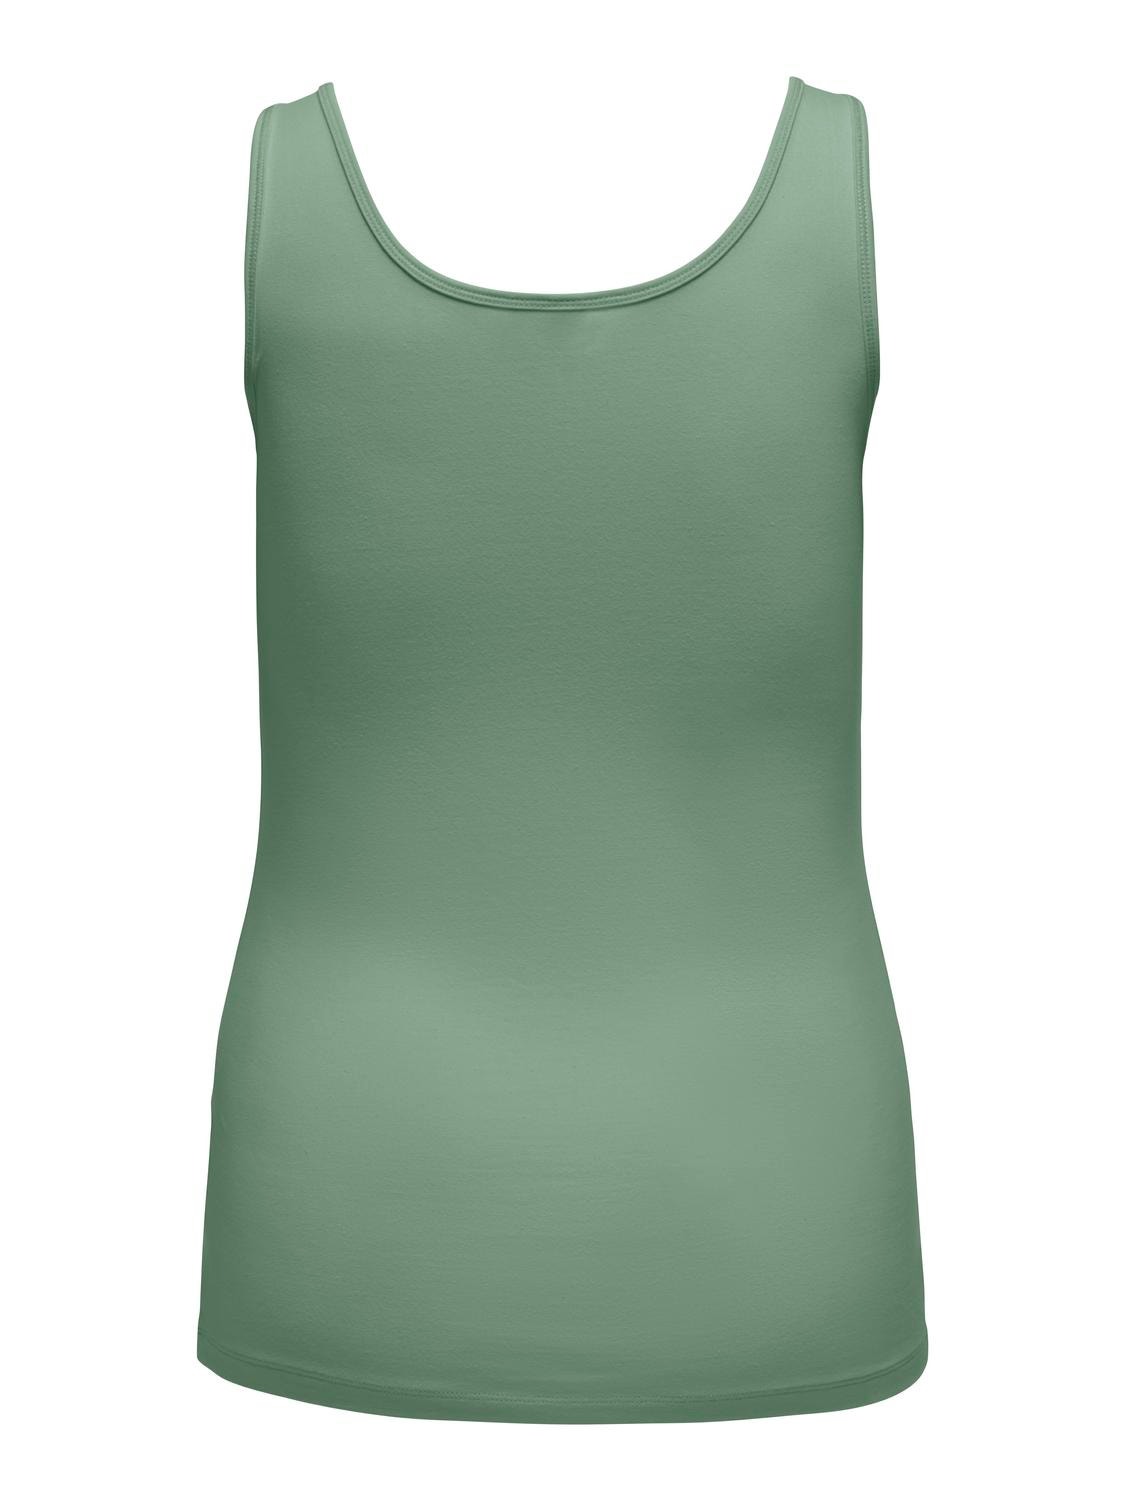 ONLY Curvy basic Tank top -Hedge Green - 15188036